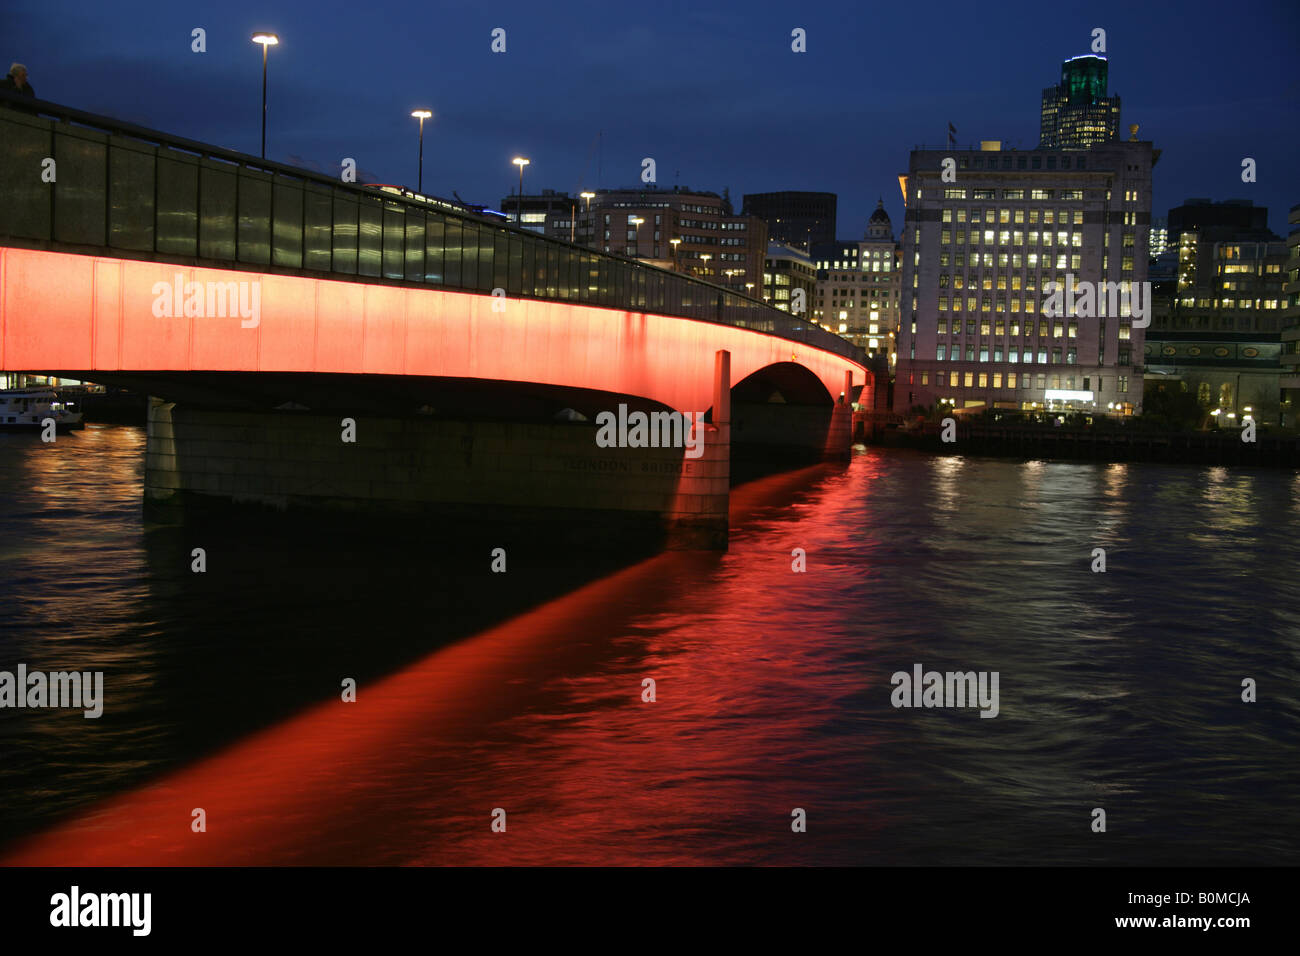 City of London, England. Night view of London Bridge over the River Thames with the City of London in the background. Stock Photo